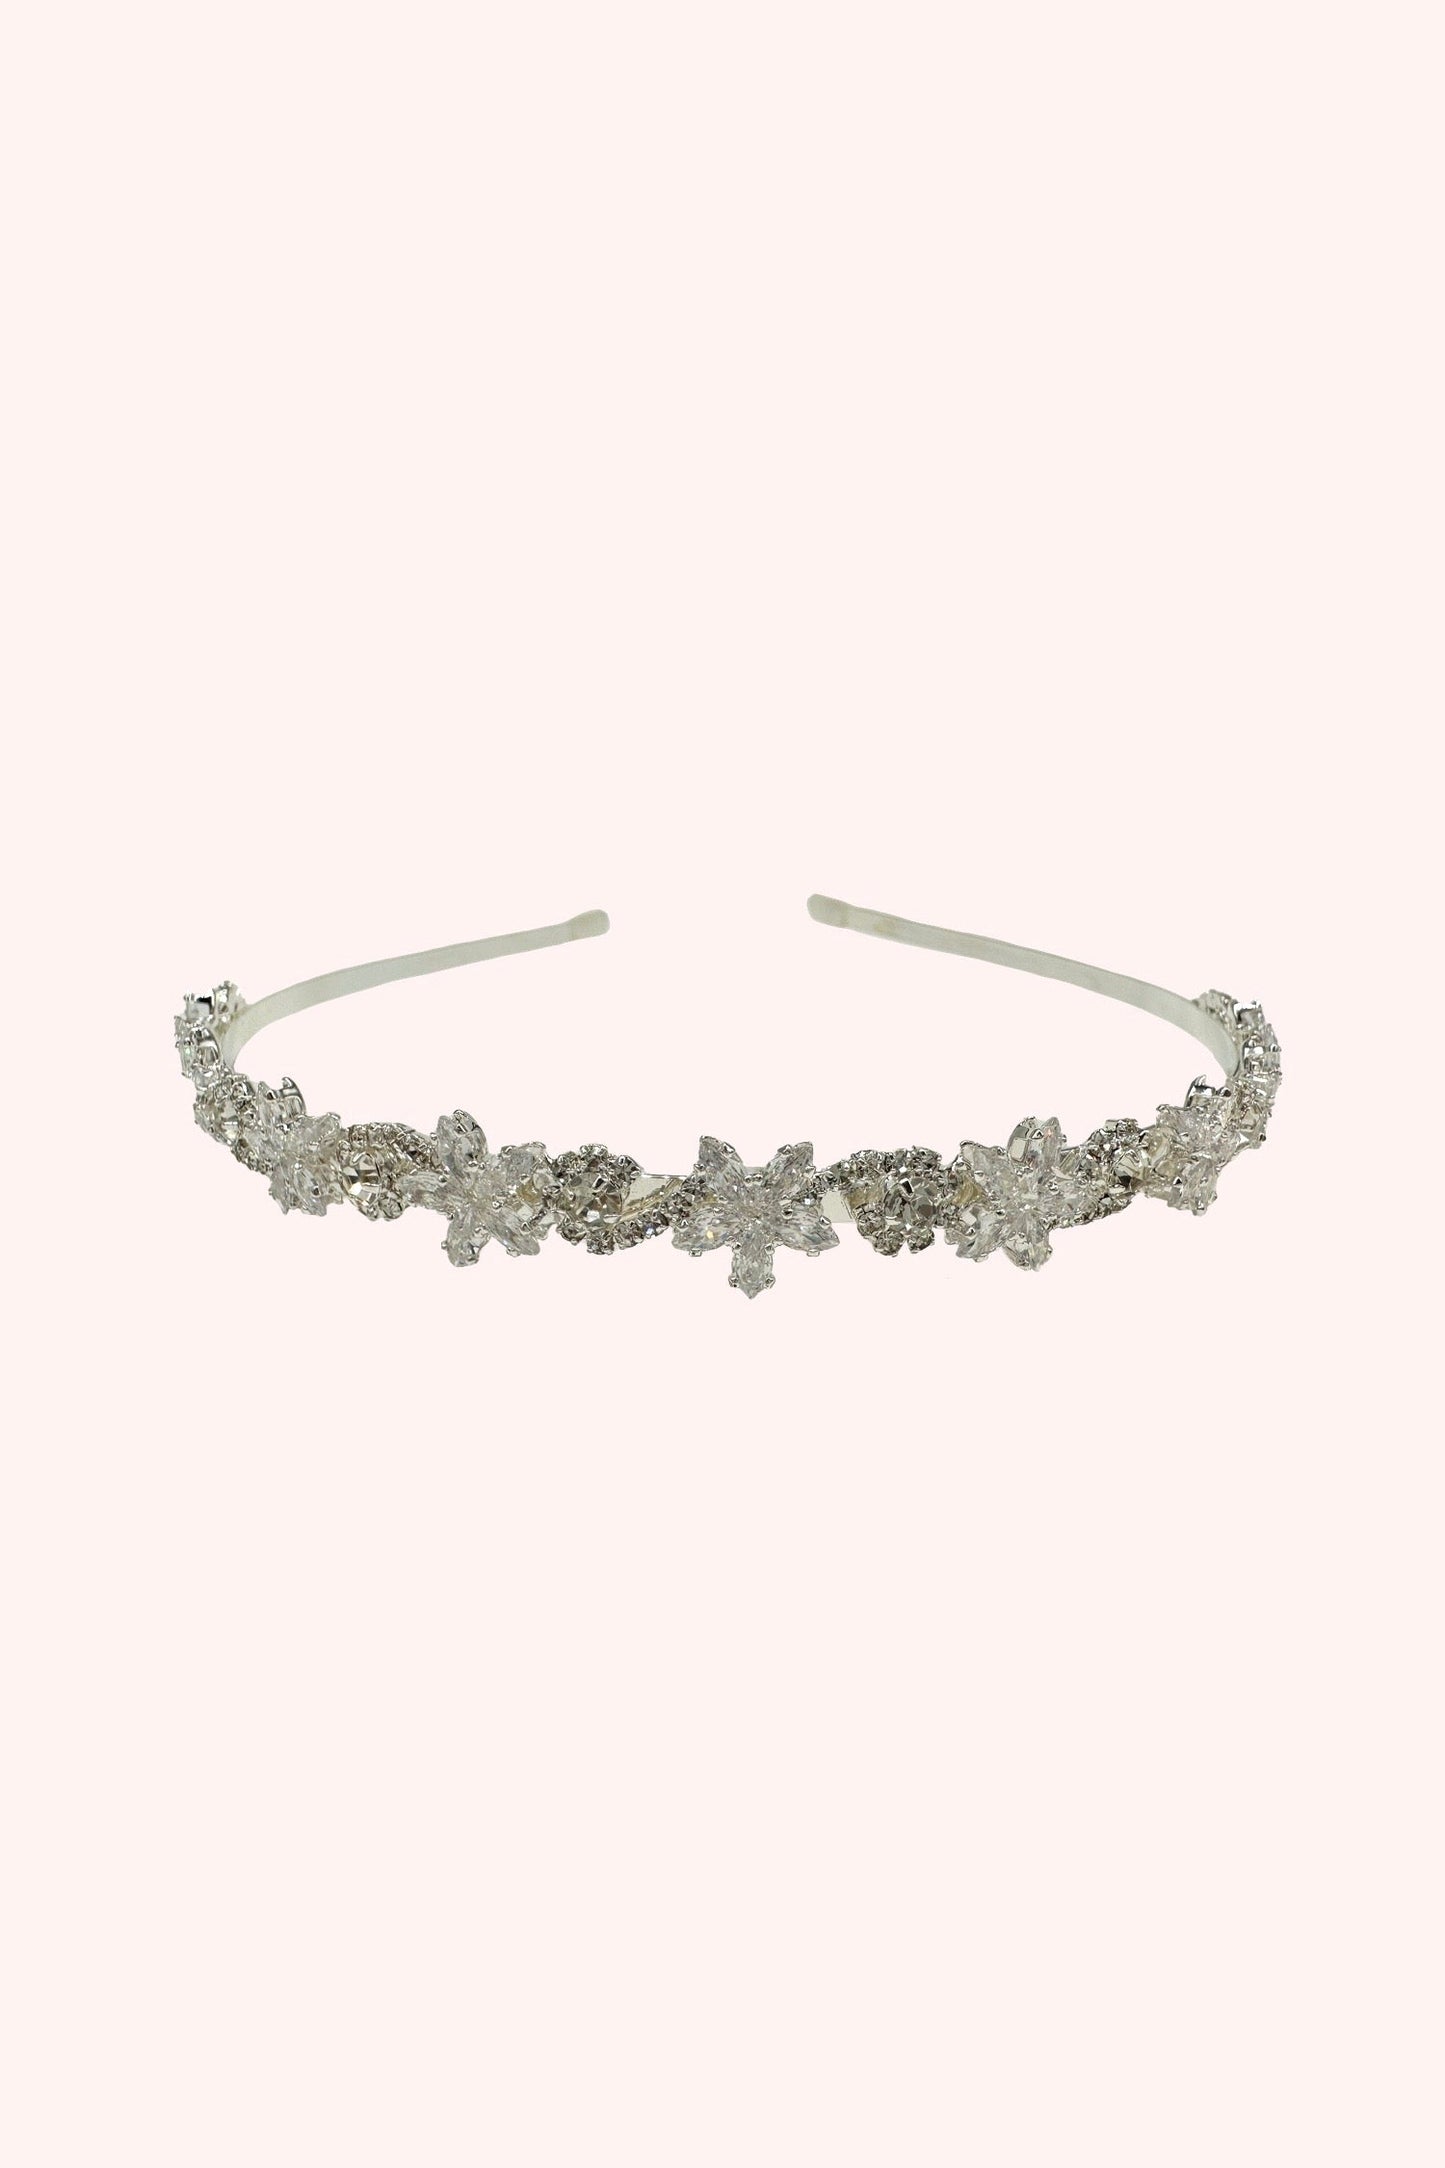 Bejeweled Oh My Stars Headband, silvery, on a white support, Glass rhinestones Alloy metal base